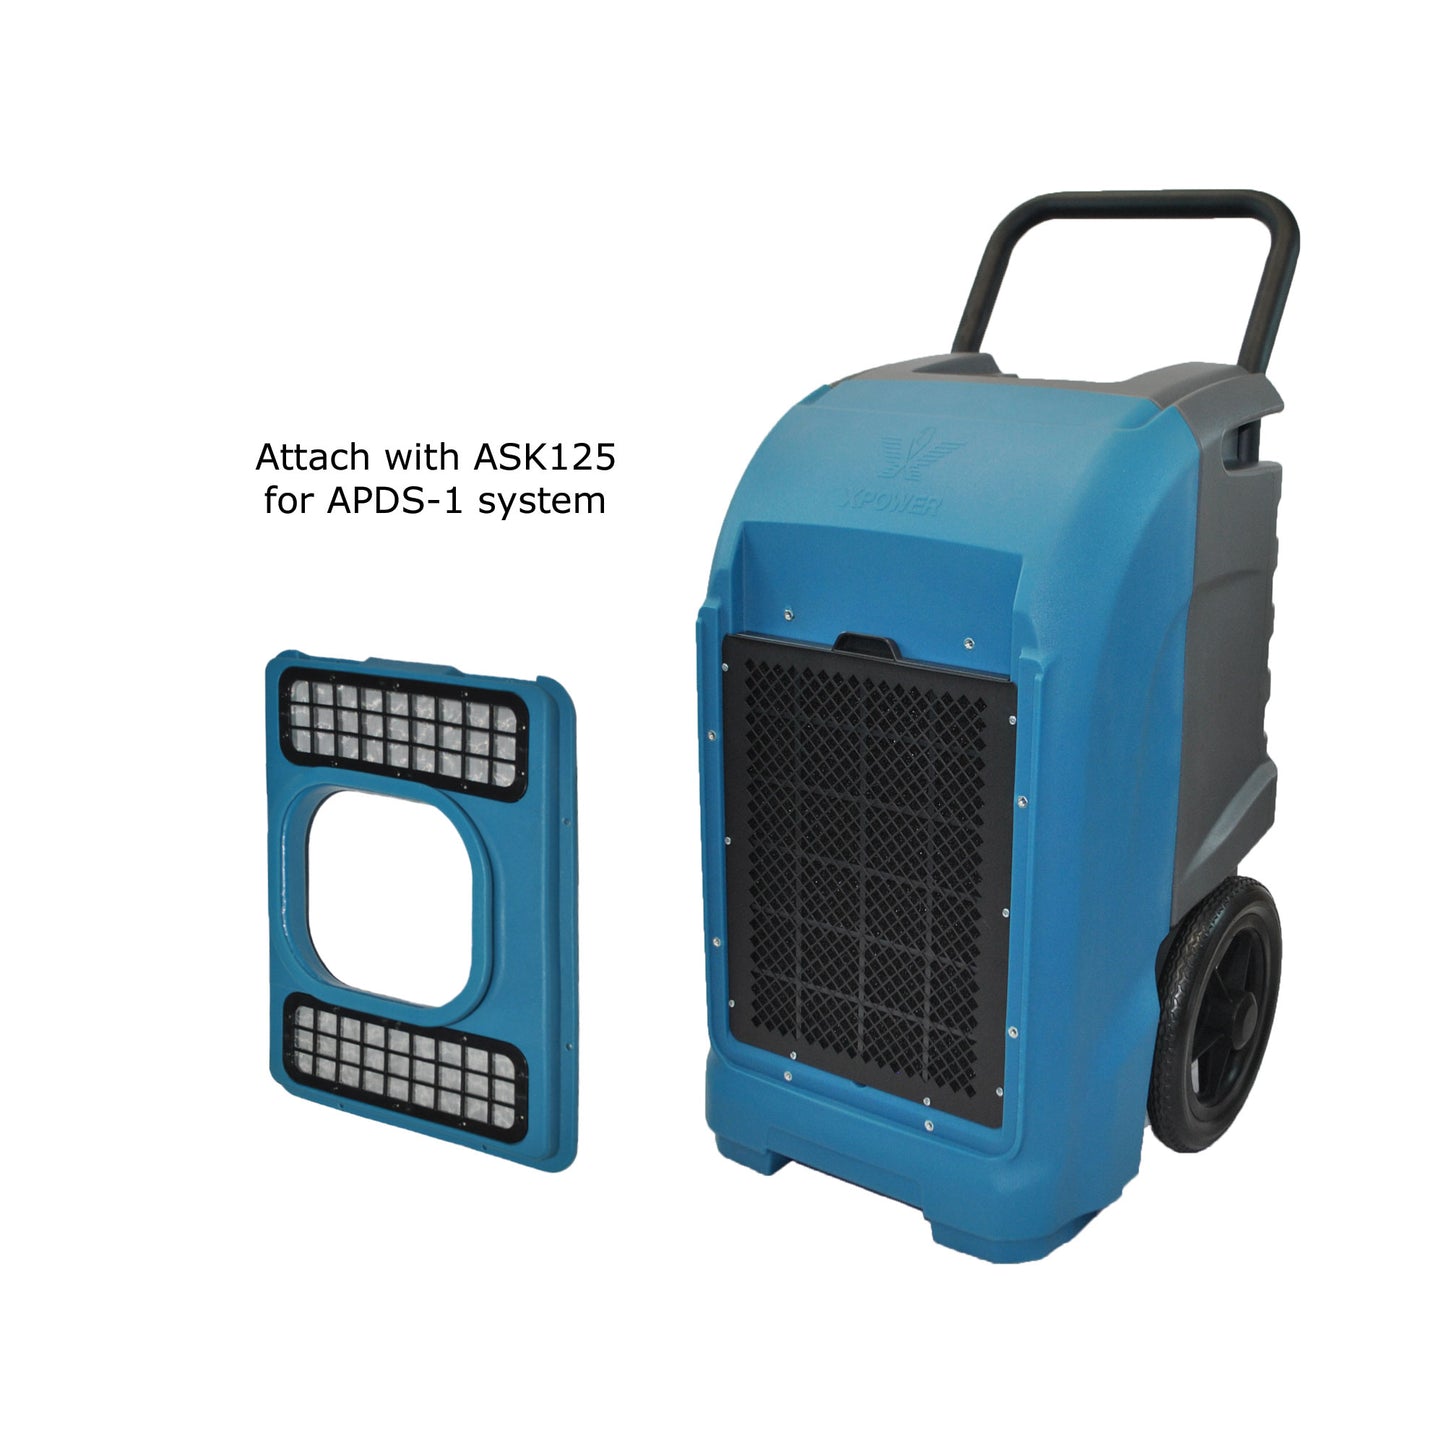 XPOWER ASK125 - adapter for dehumidifier air purification system